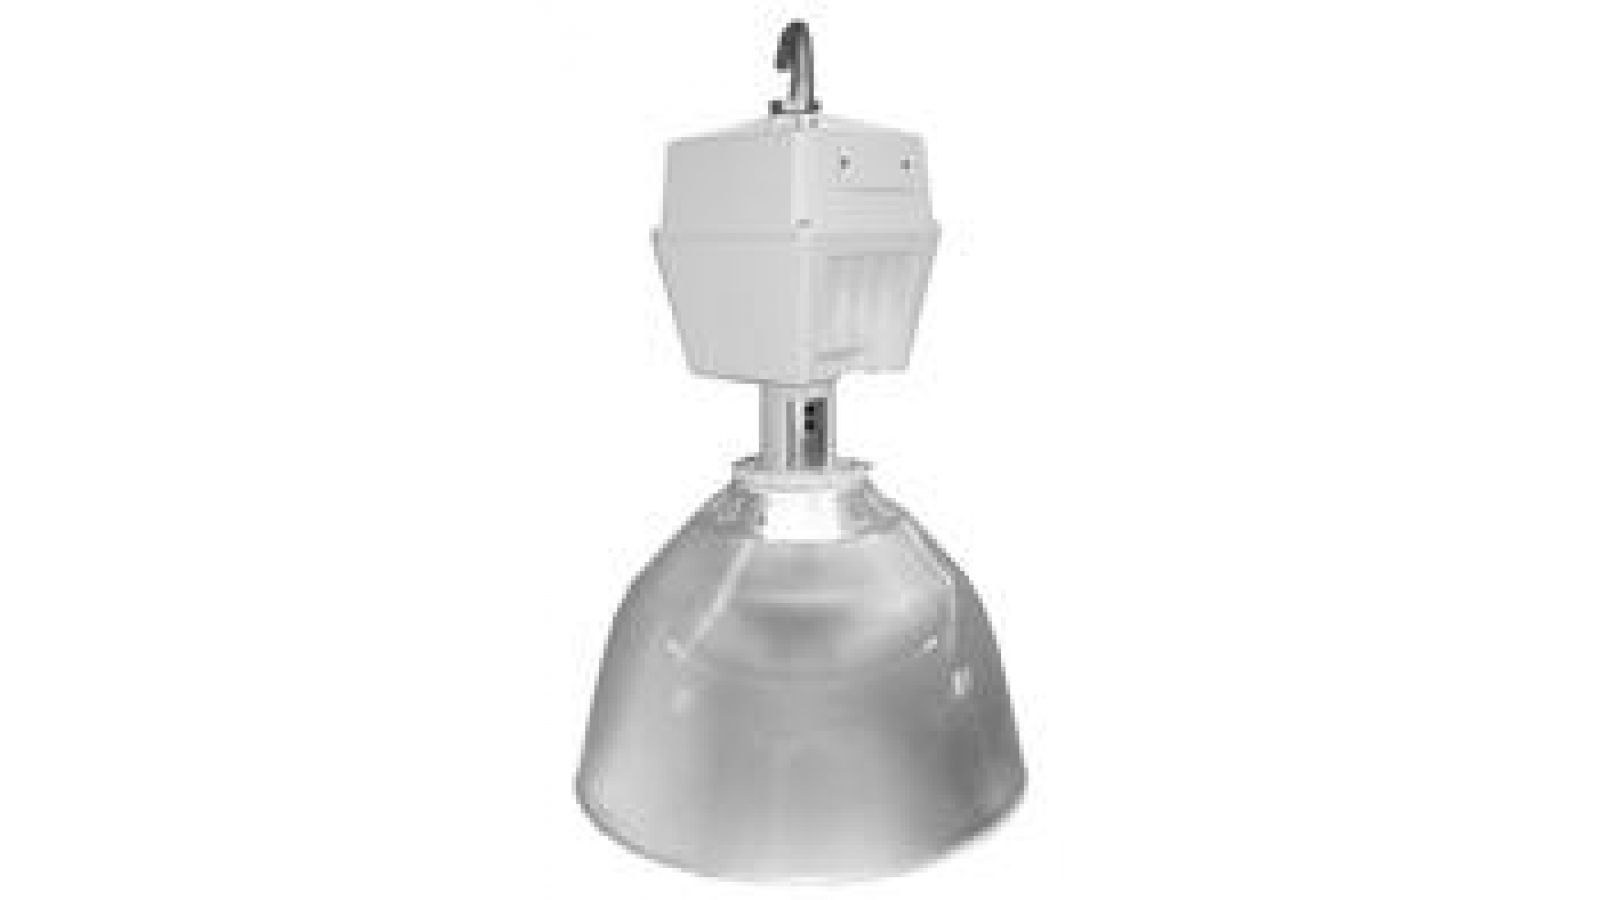 Achieve Magnetic 575W High-Bay Luminaire